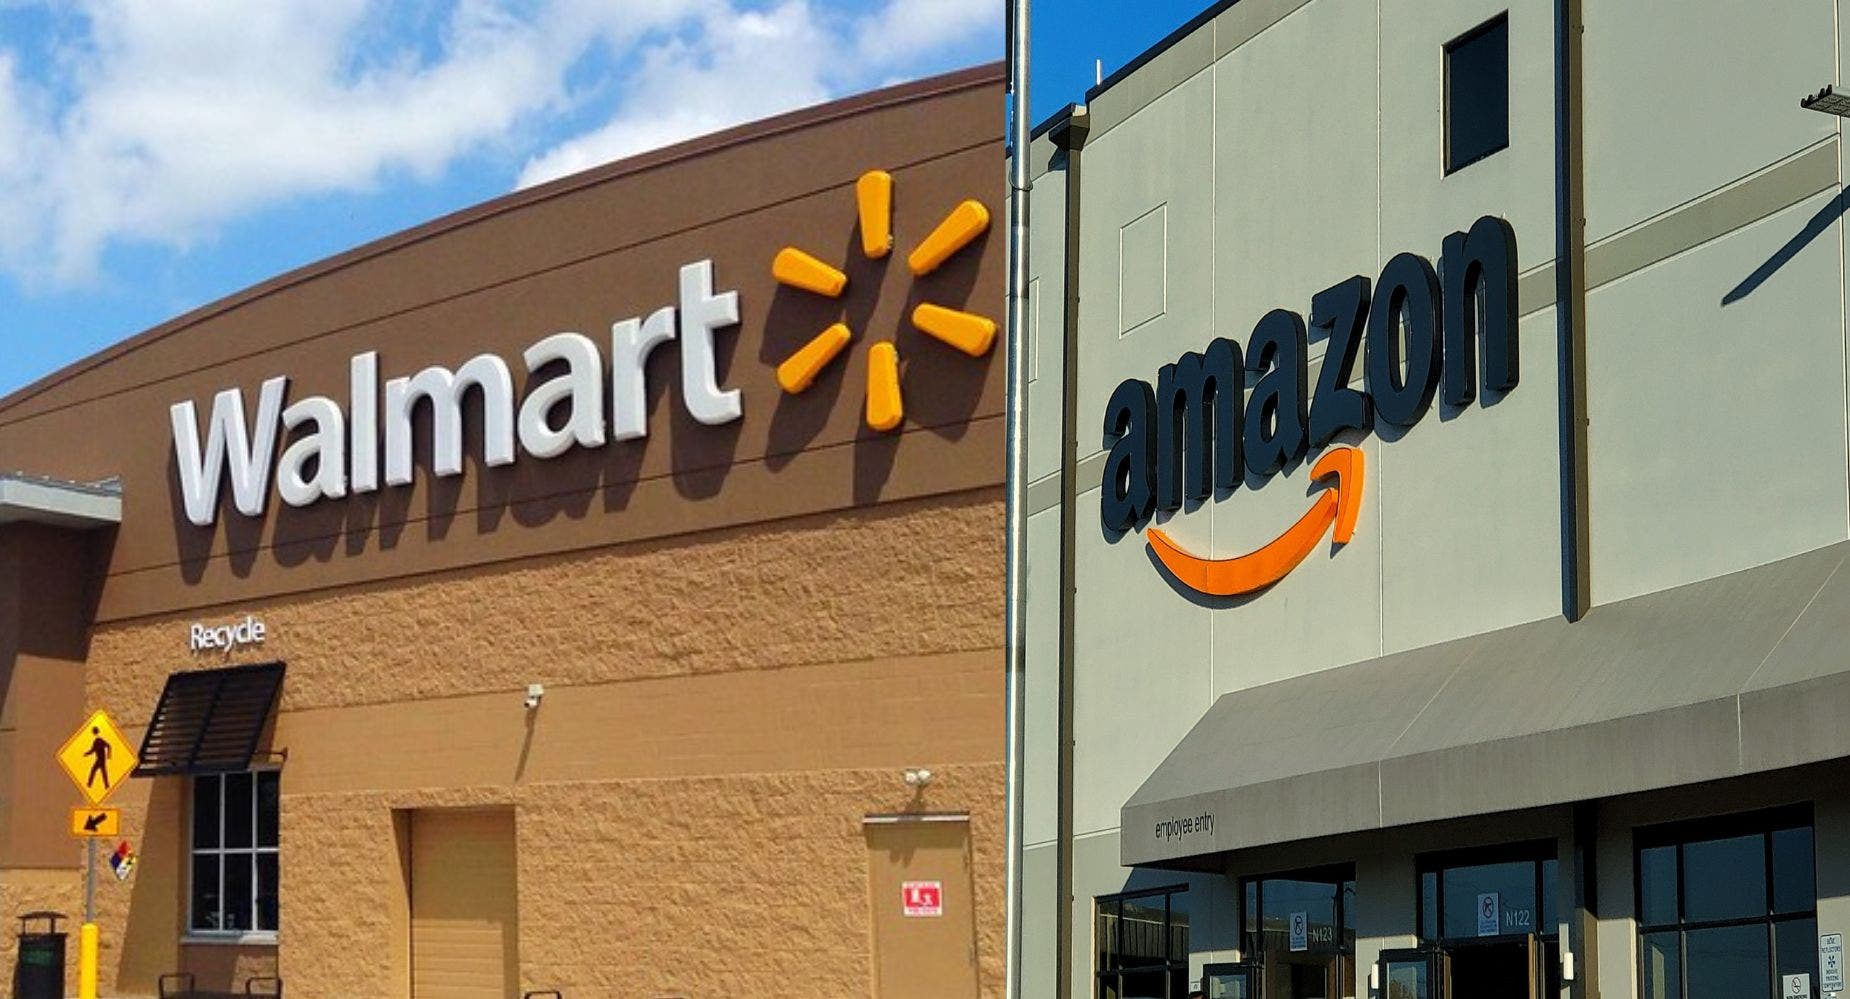 Walmart Fires Another Shot At Amazon: How The Discount Wars Are Heating Up, This Time With 50% Off